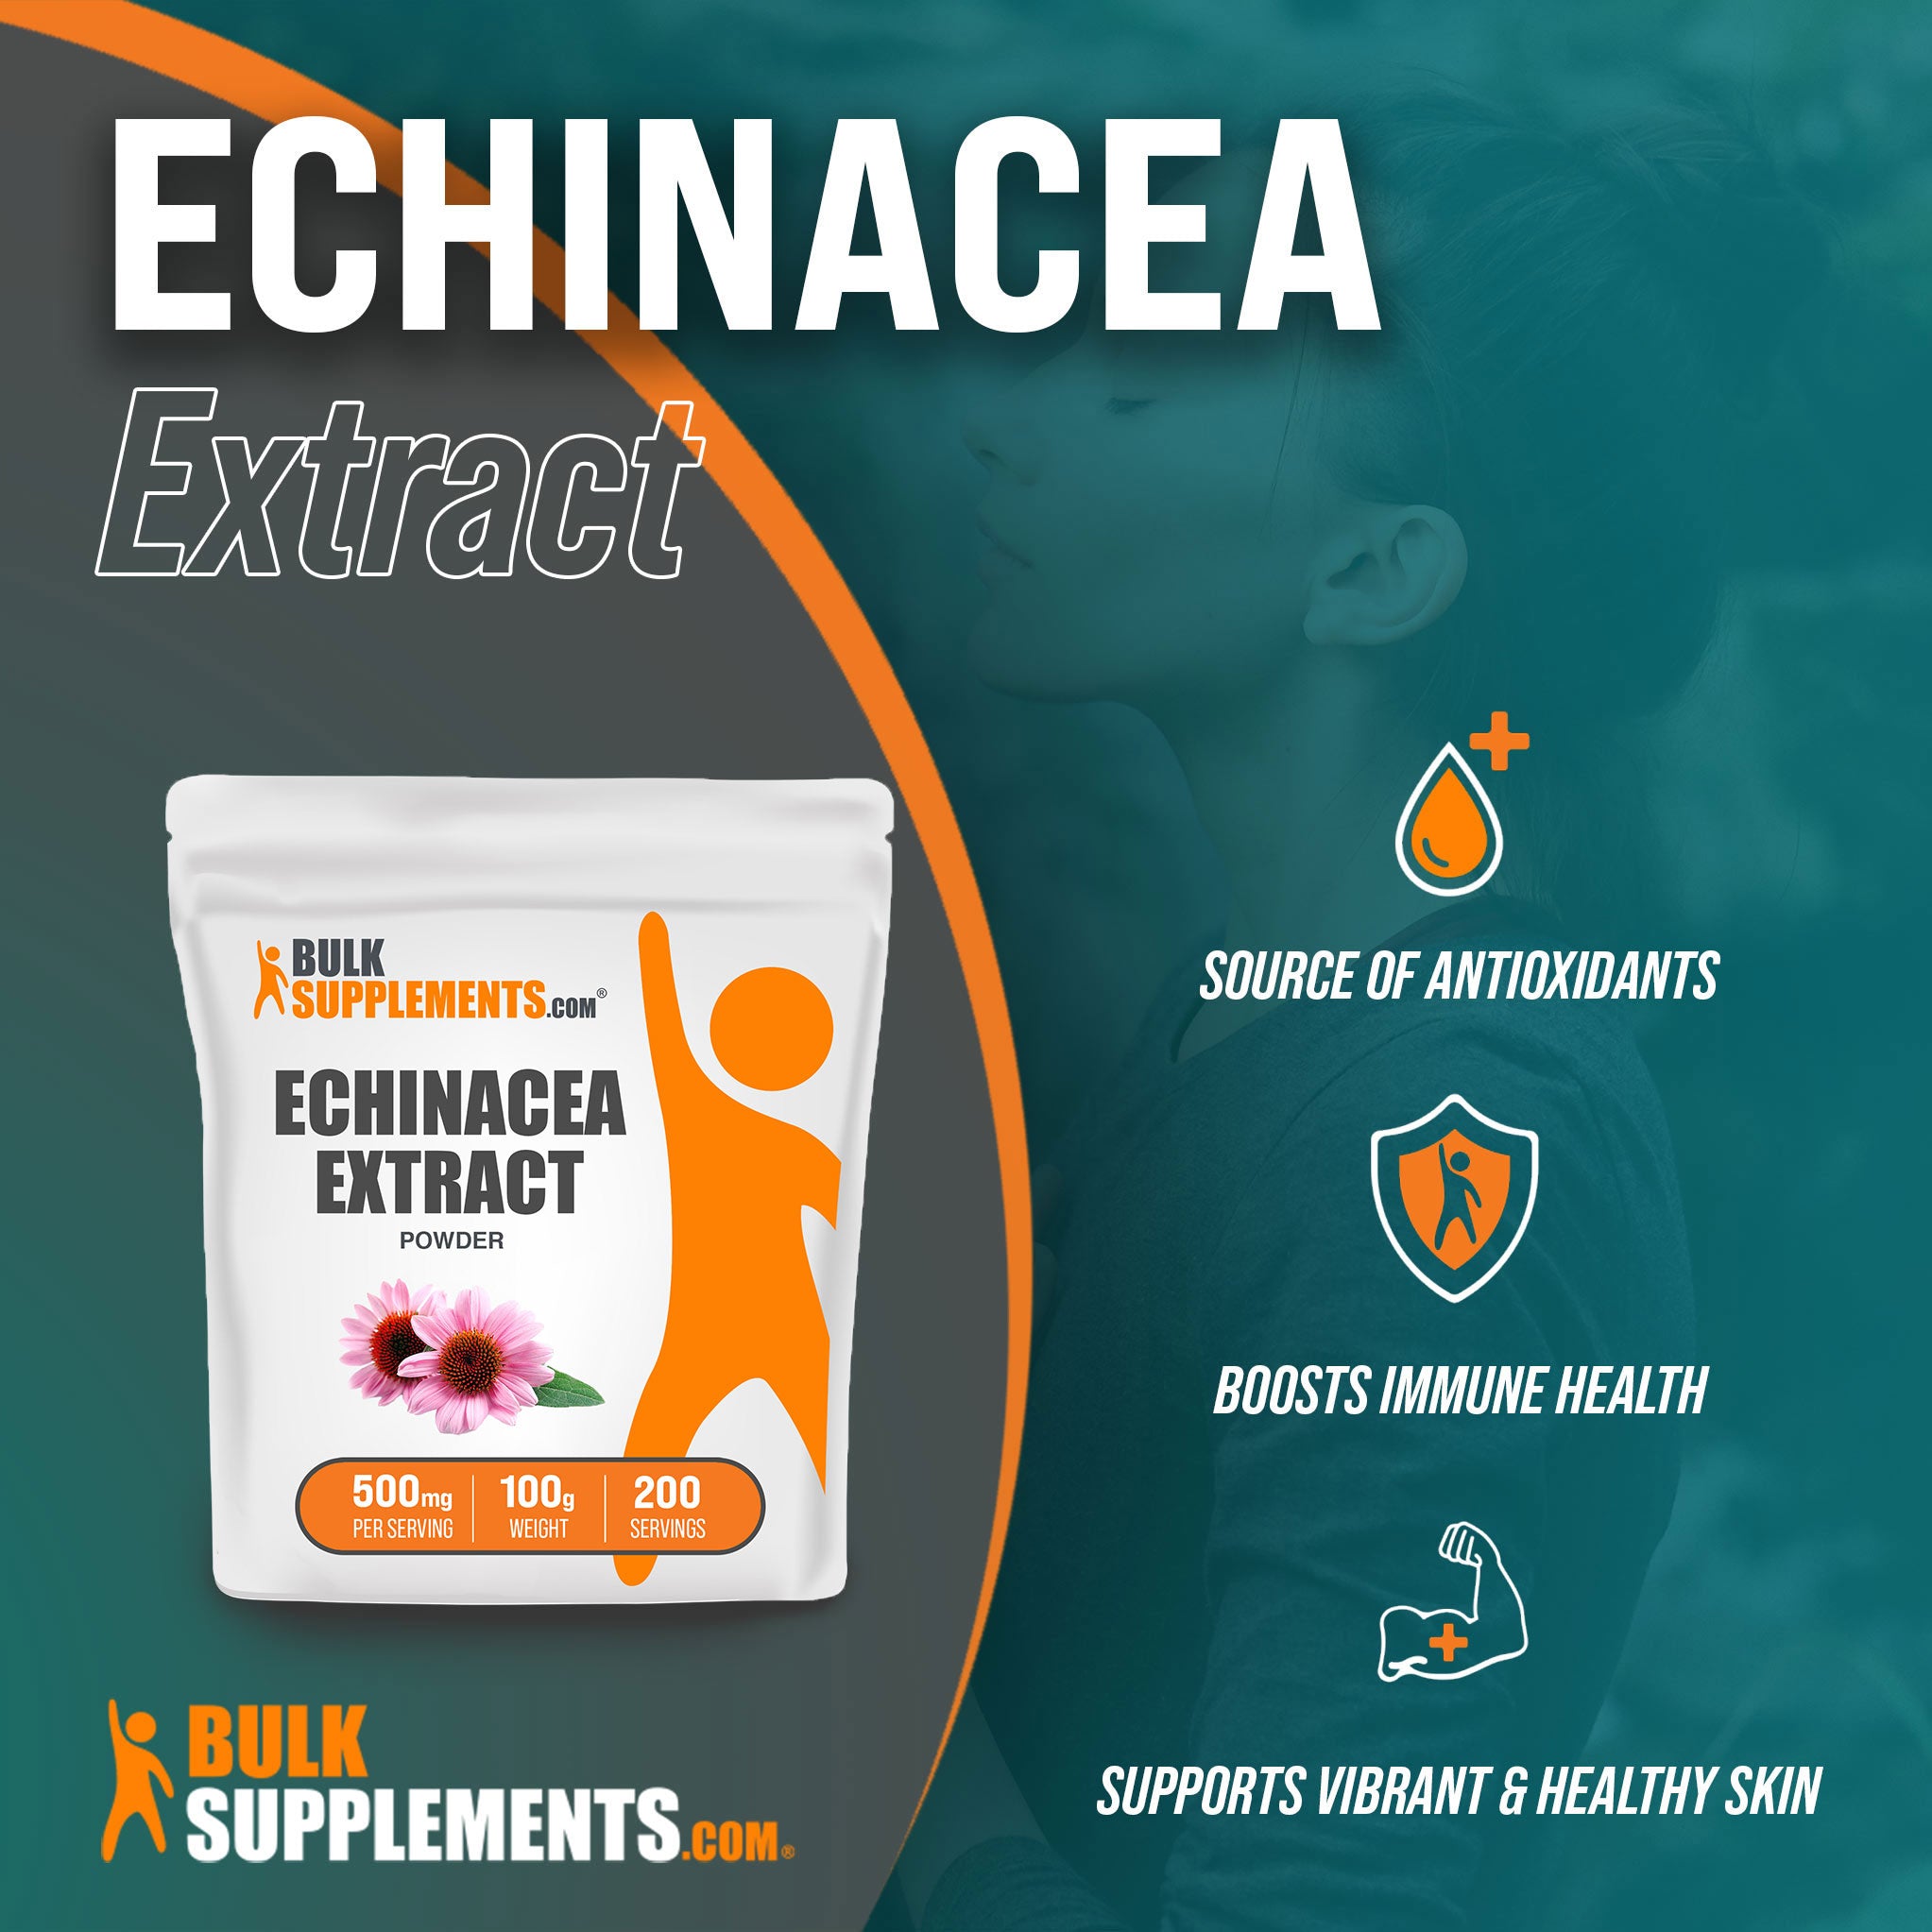 Benefits of Echinacea Extract; source of antioxidants, boosts immune health, supports vibrant & healthy skin